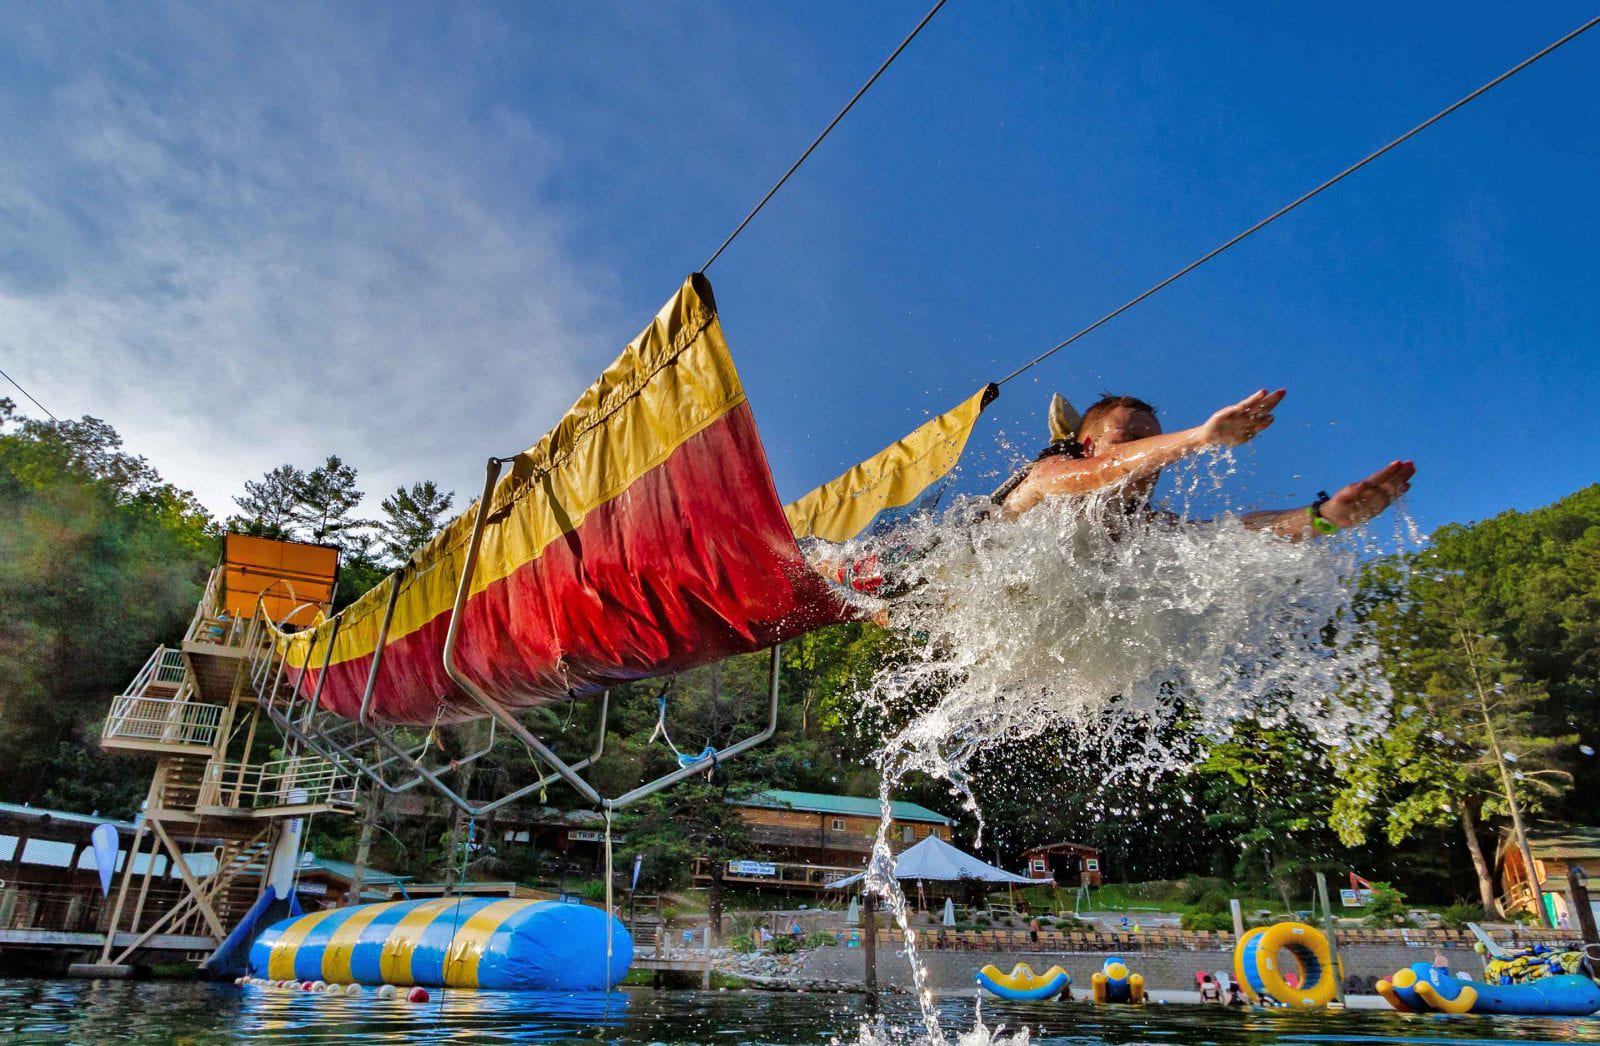 Photo of ACE"s Wonderland, a Water Park Near Me